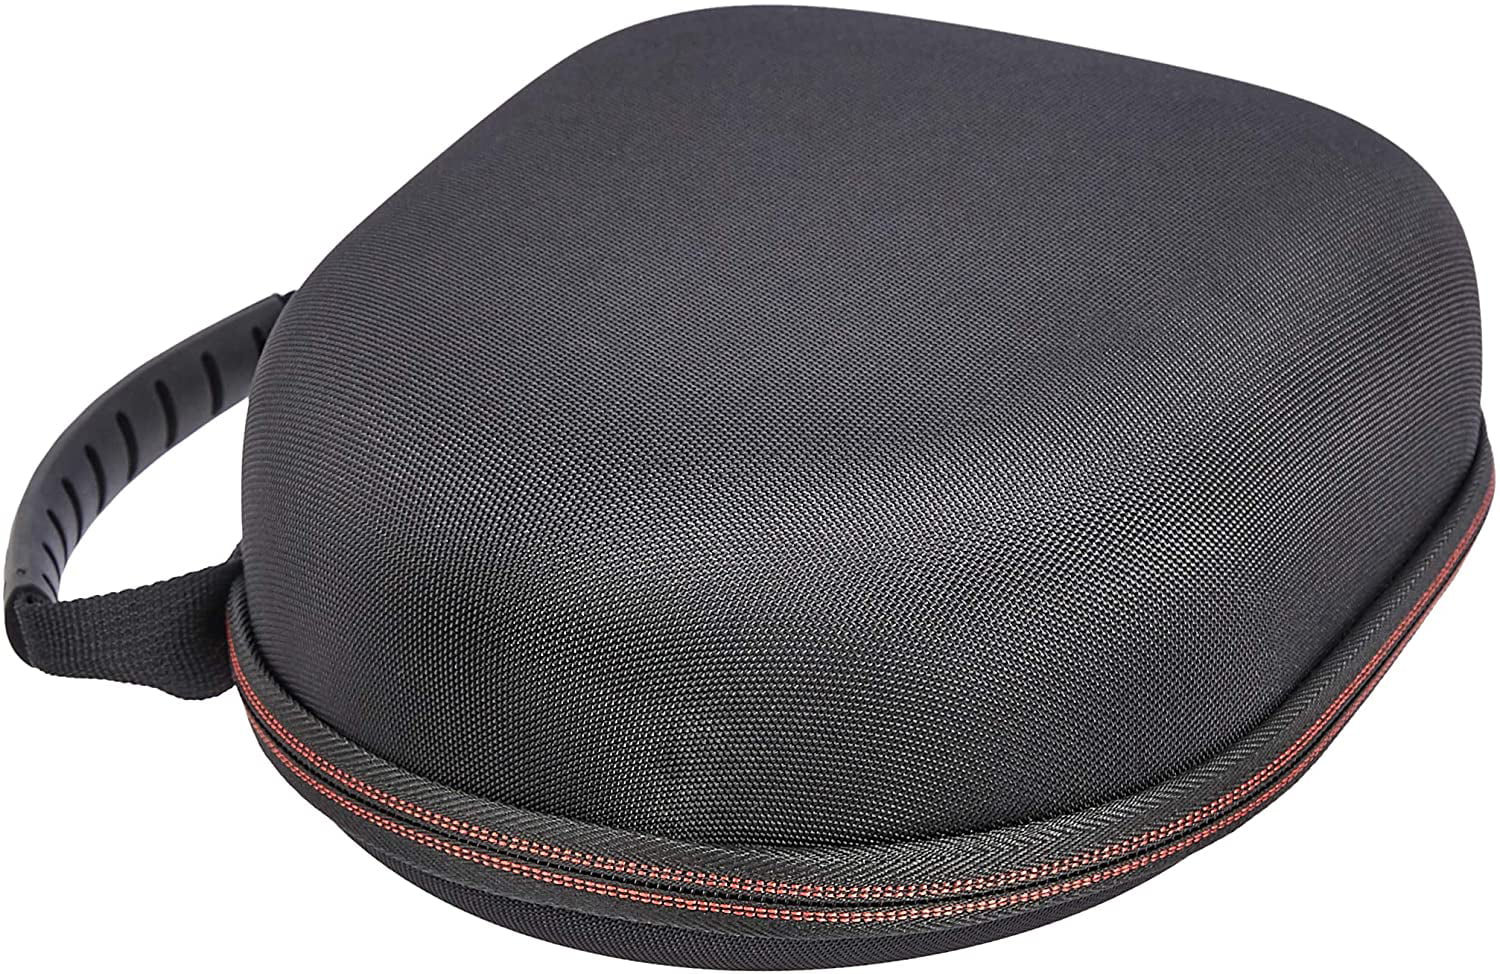 Basics Hard Headphone Carrying Case Philips Bose 8.6 x 7.5 x 3.6 Maxell Compatible with Sony Beats Panasonic and More Black